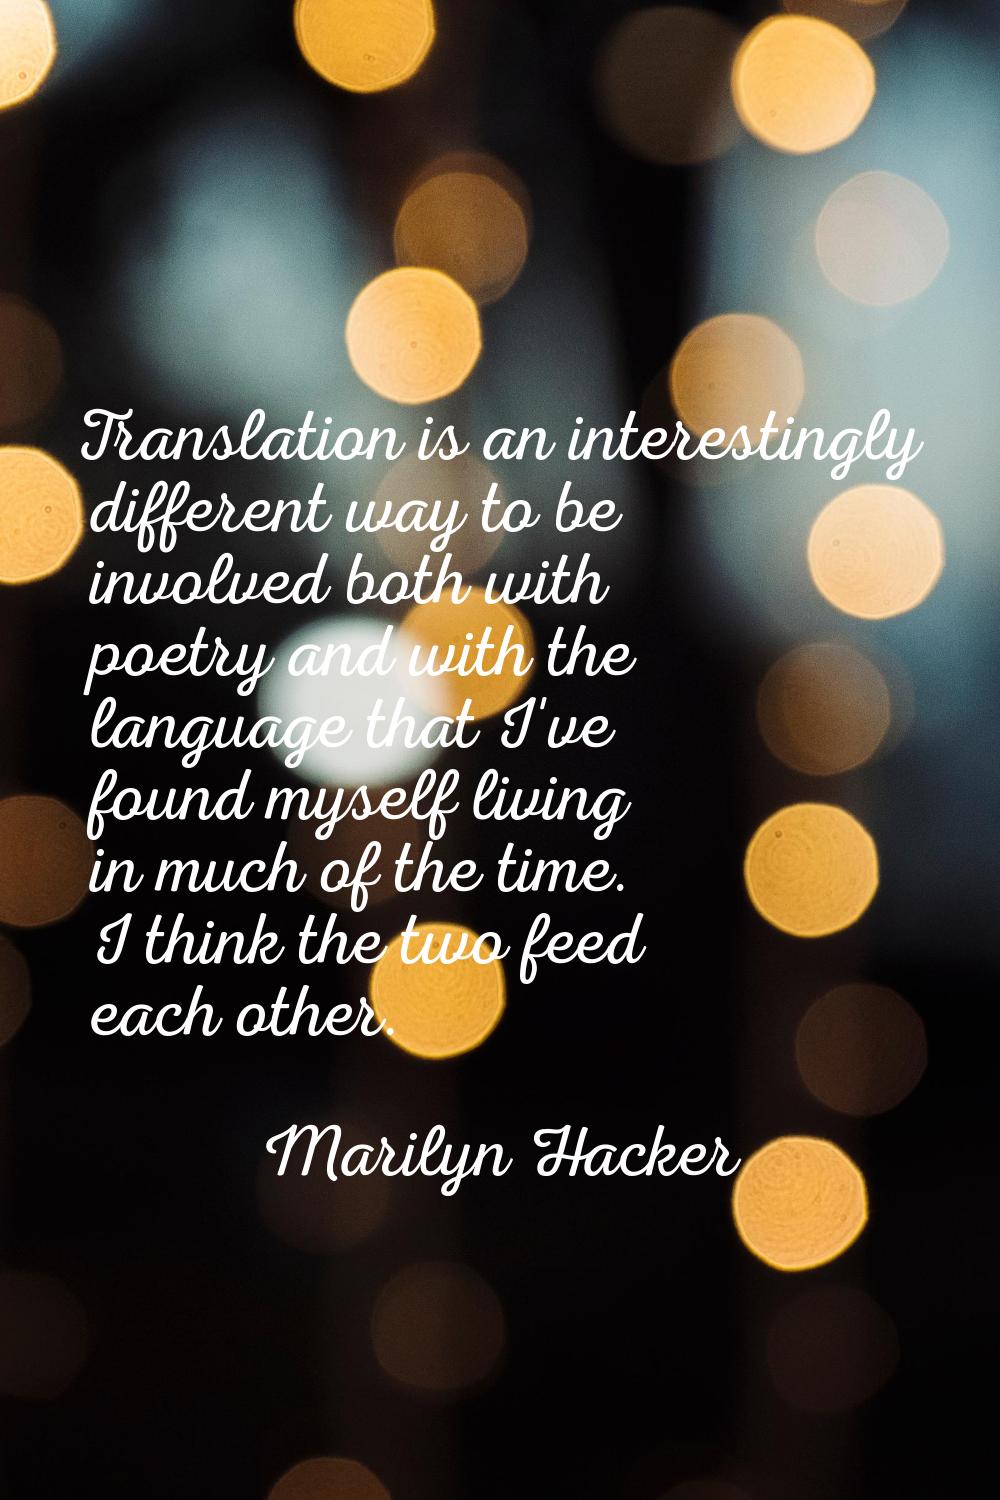 Translation is an interestingly different way to be involved both with poetry and with the language